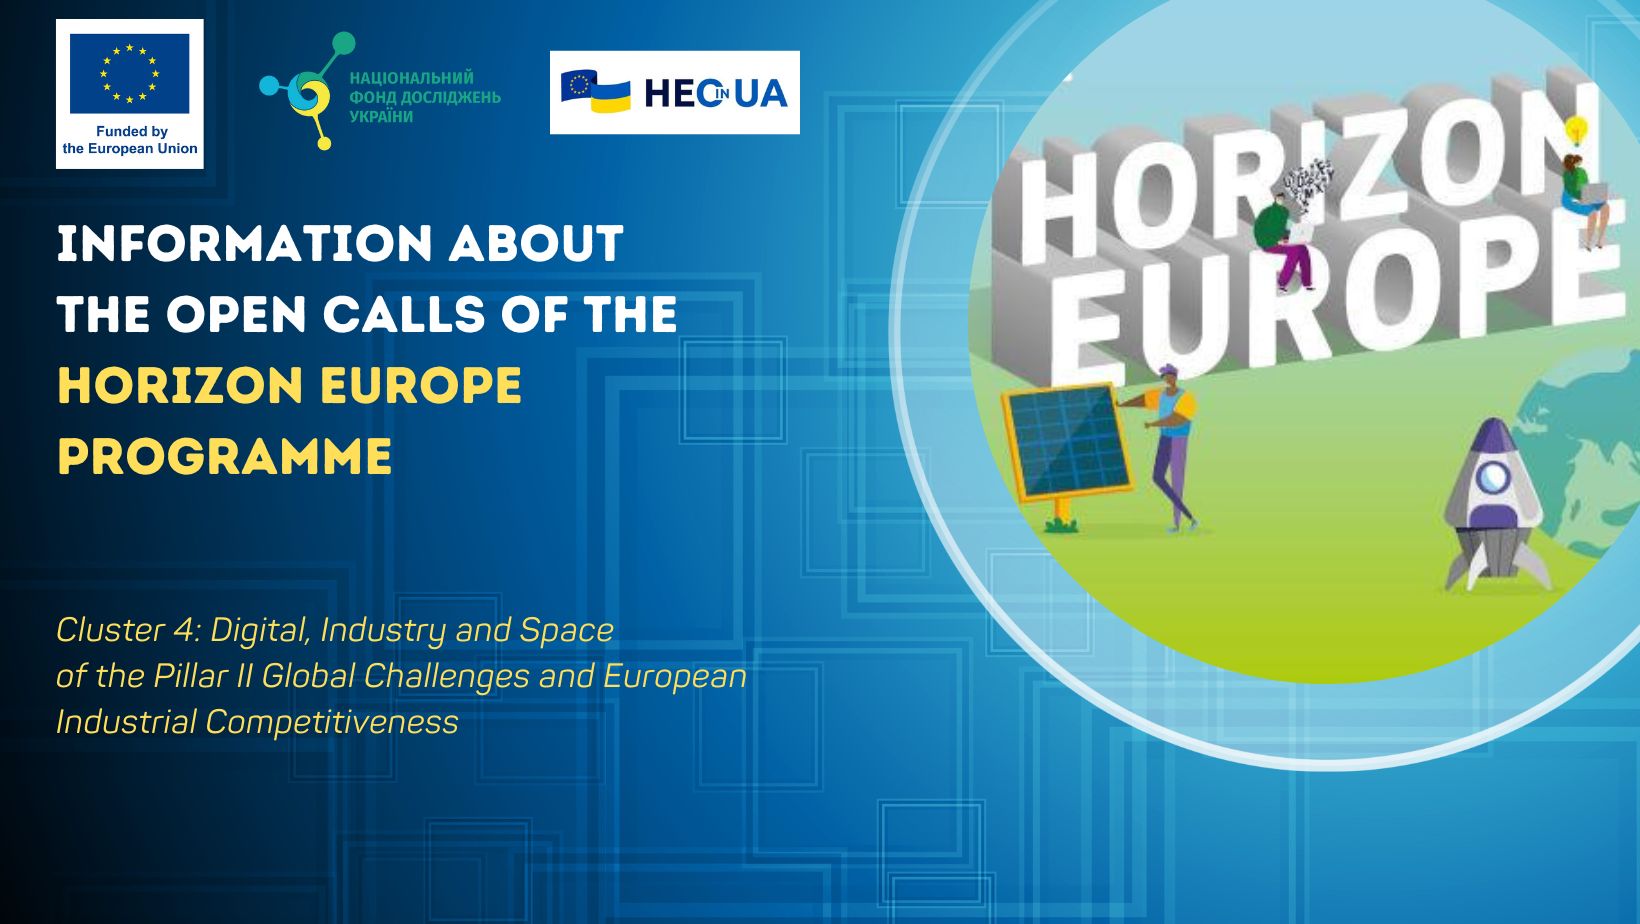 Information about open calls under Cluster 4: Digital, Industry and Space within Horizon Europe Programme